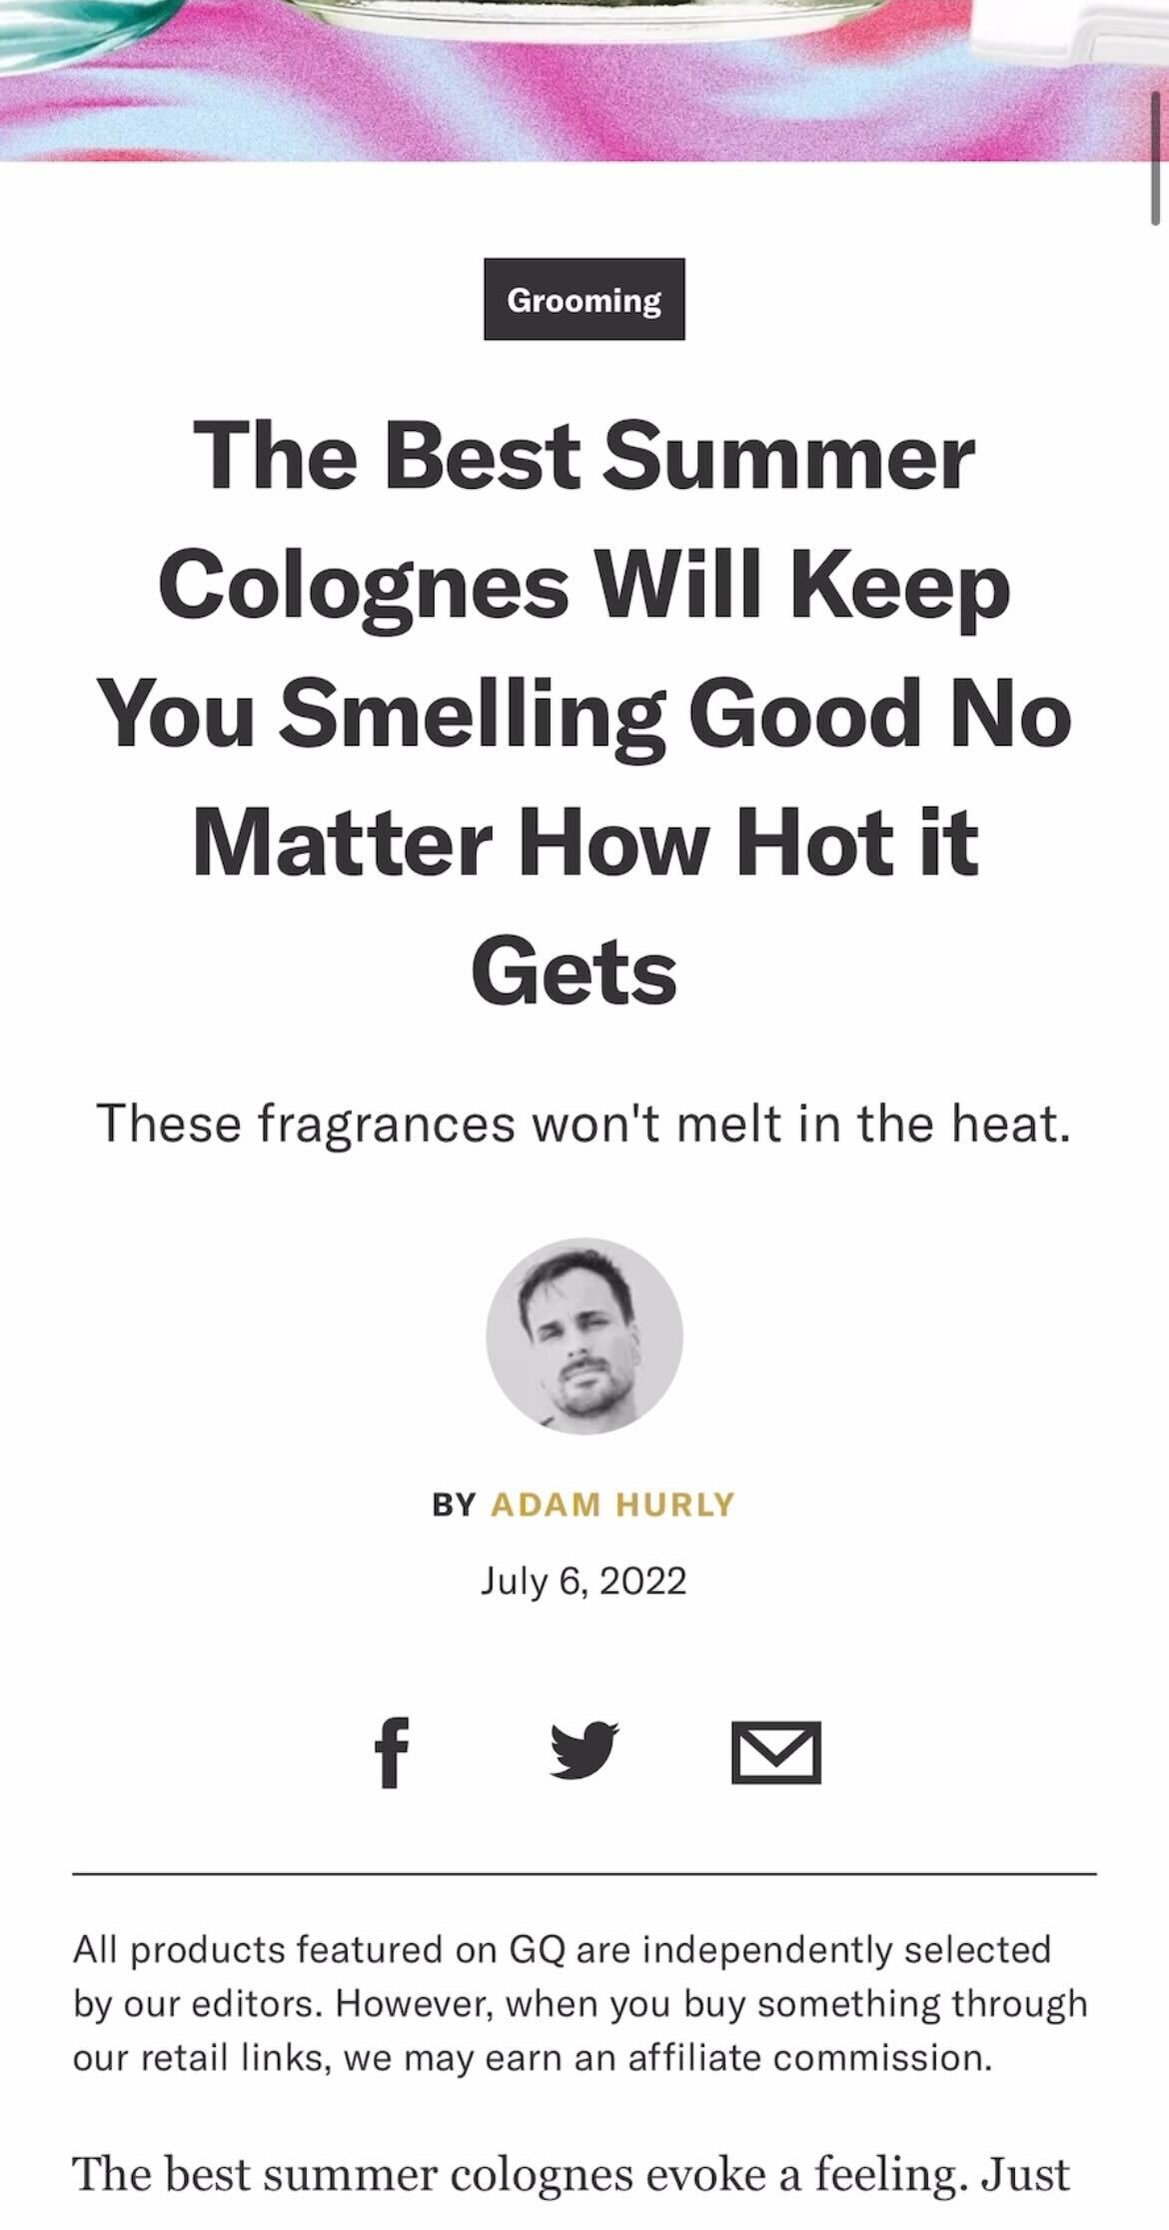 GQ July 2022 article cover of The Best Summer Fragrances, written by Adam Hurly, featuring Celadawn by MATTEO PARFUMS and other prestige and luxury fragrance brands like Louis Vuitton, Byredo, and Hermès